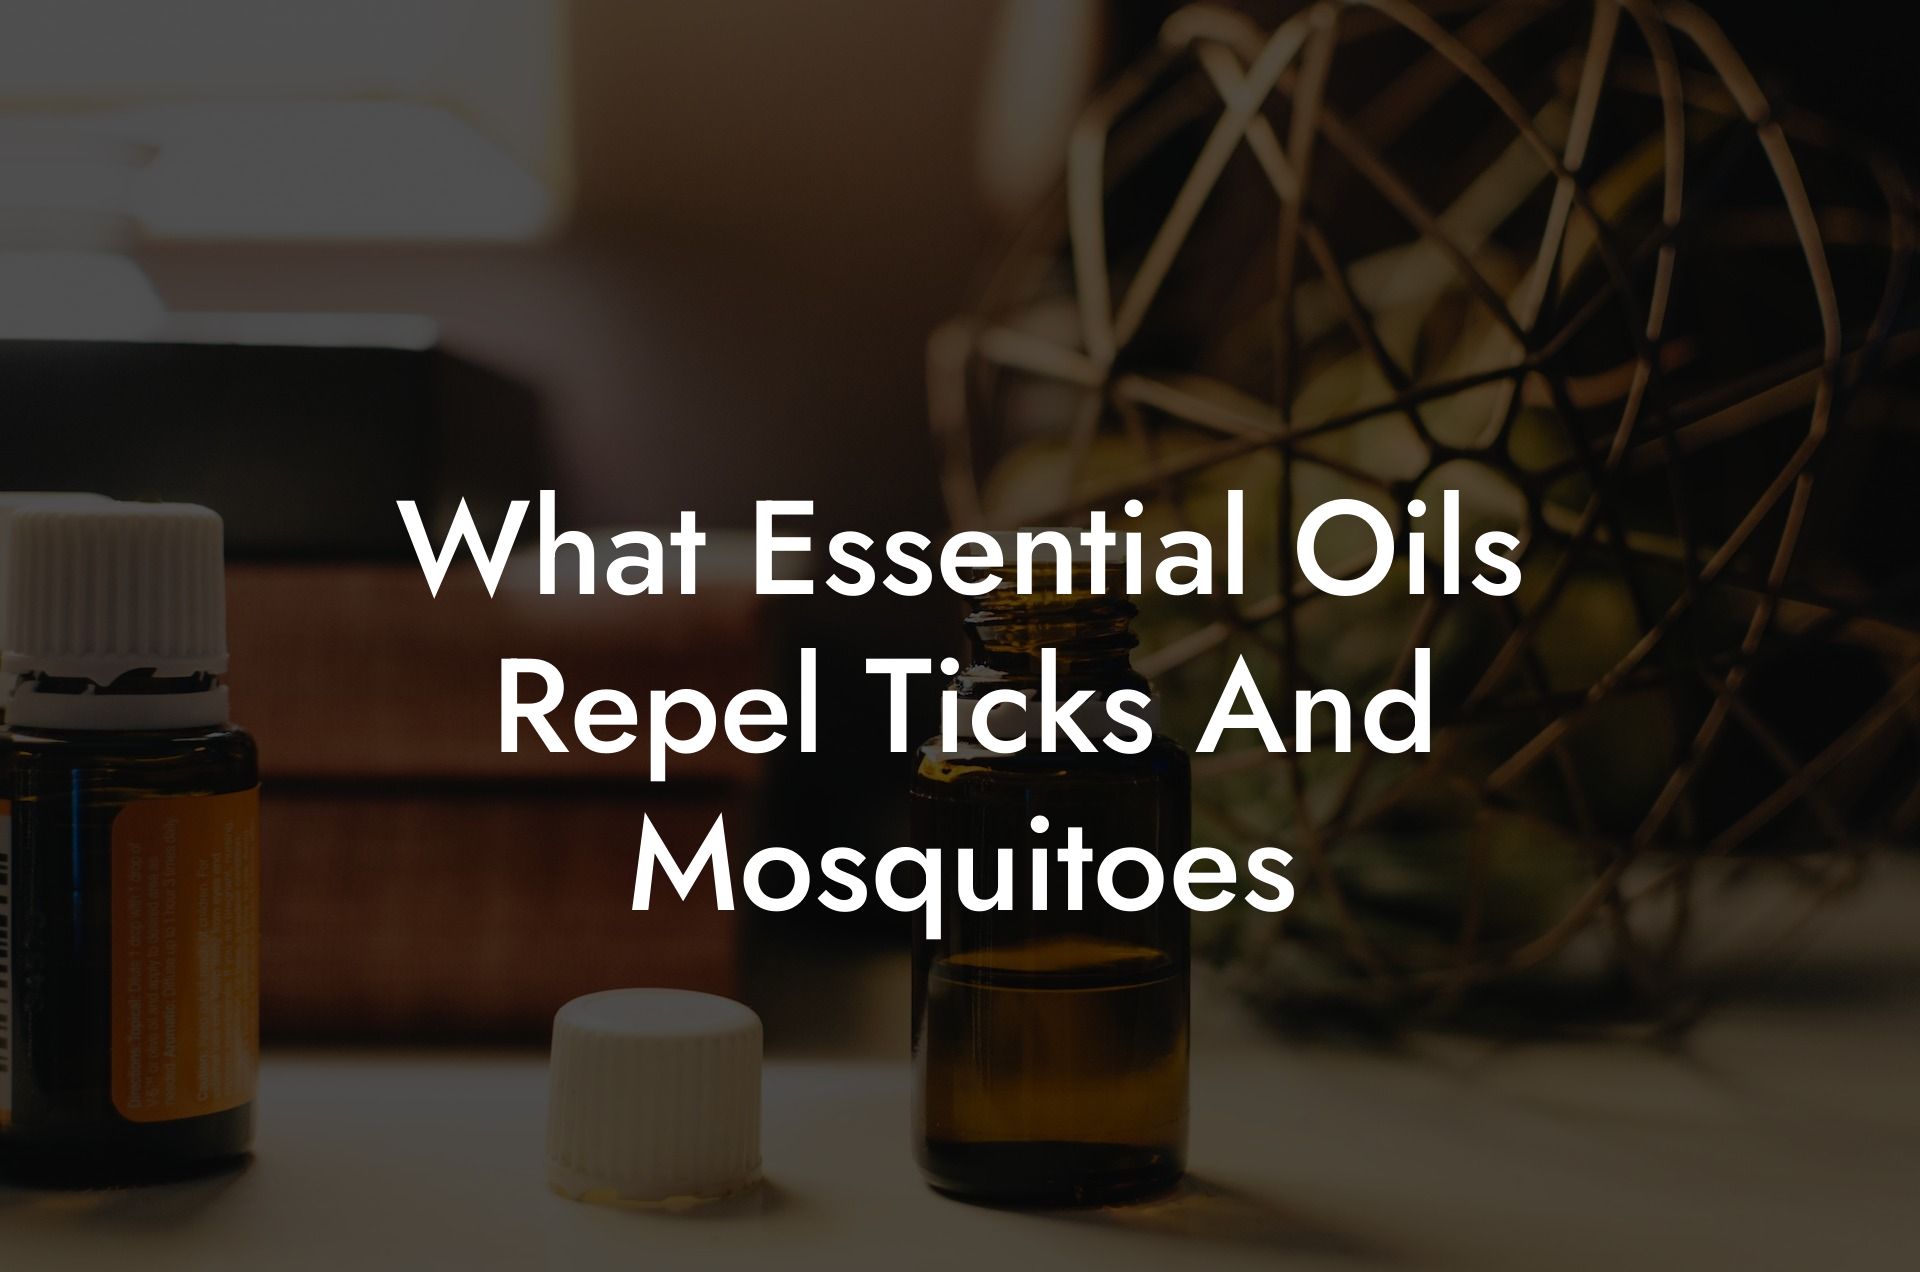 What Essential Oils Repel Ticks And Mosquitoes